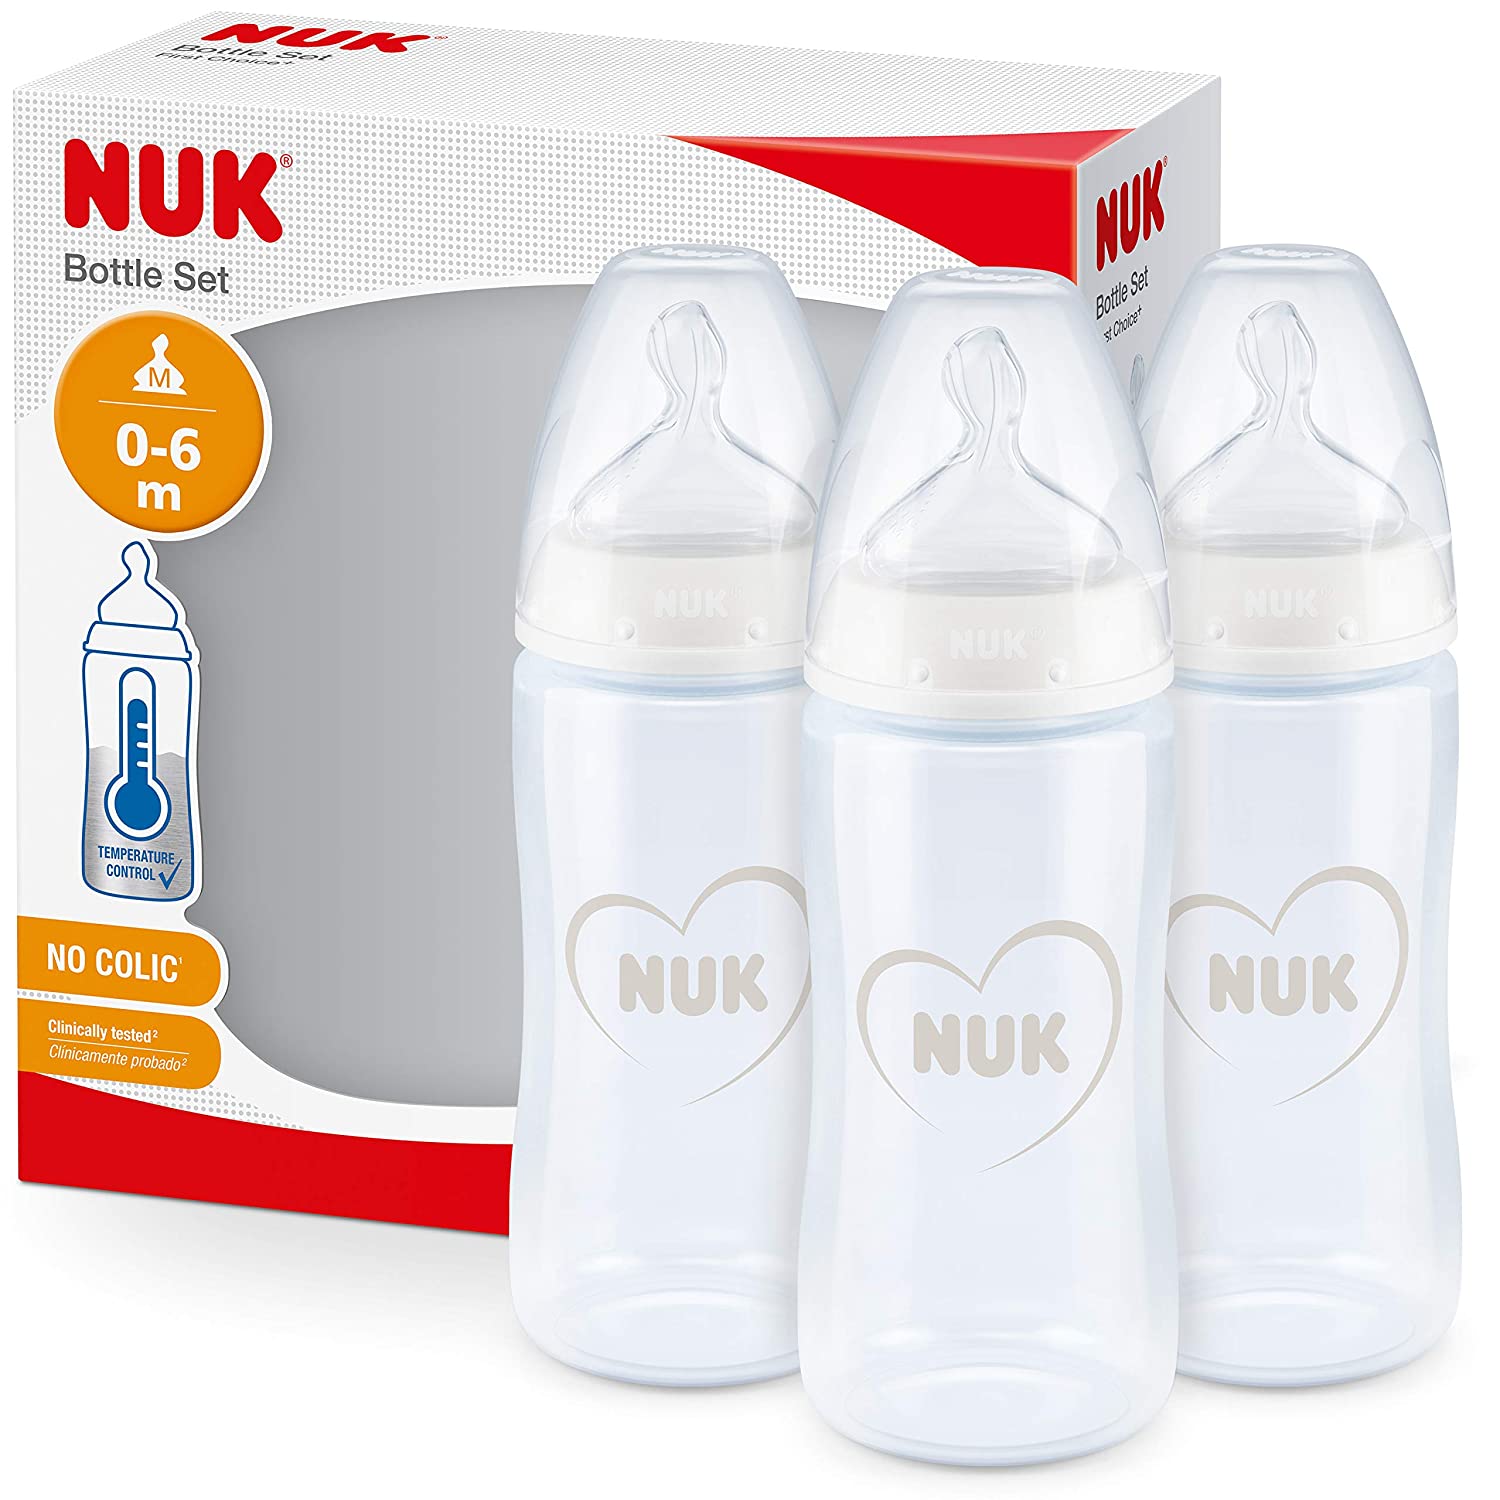 Nuk First Choice+ Baby Bottle Set, 3 Bottles with Temperature Control Display, Anti-Colic, 300 ml, 0-6 Months, Silicone Teat, BPA-Free